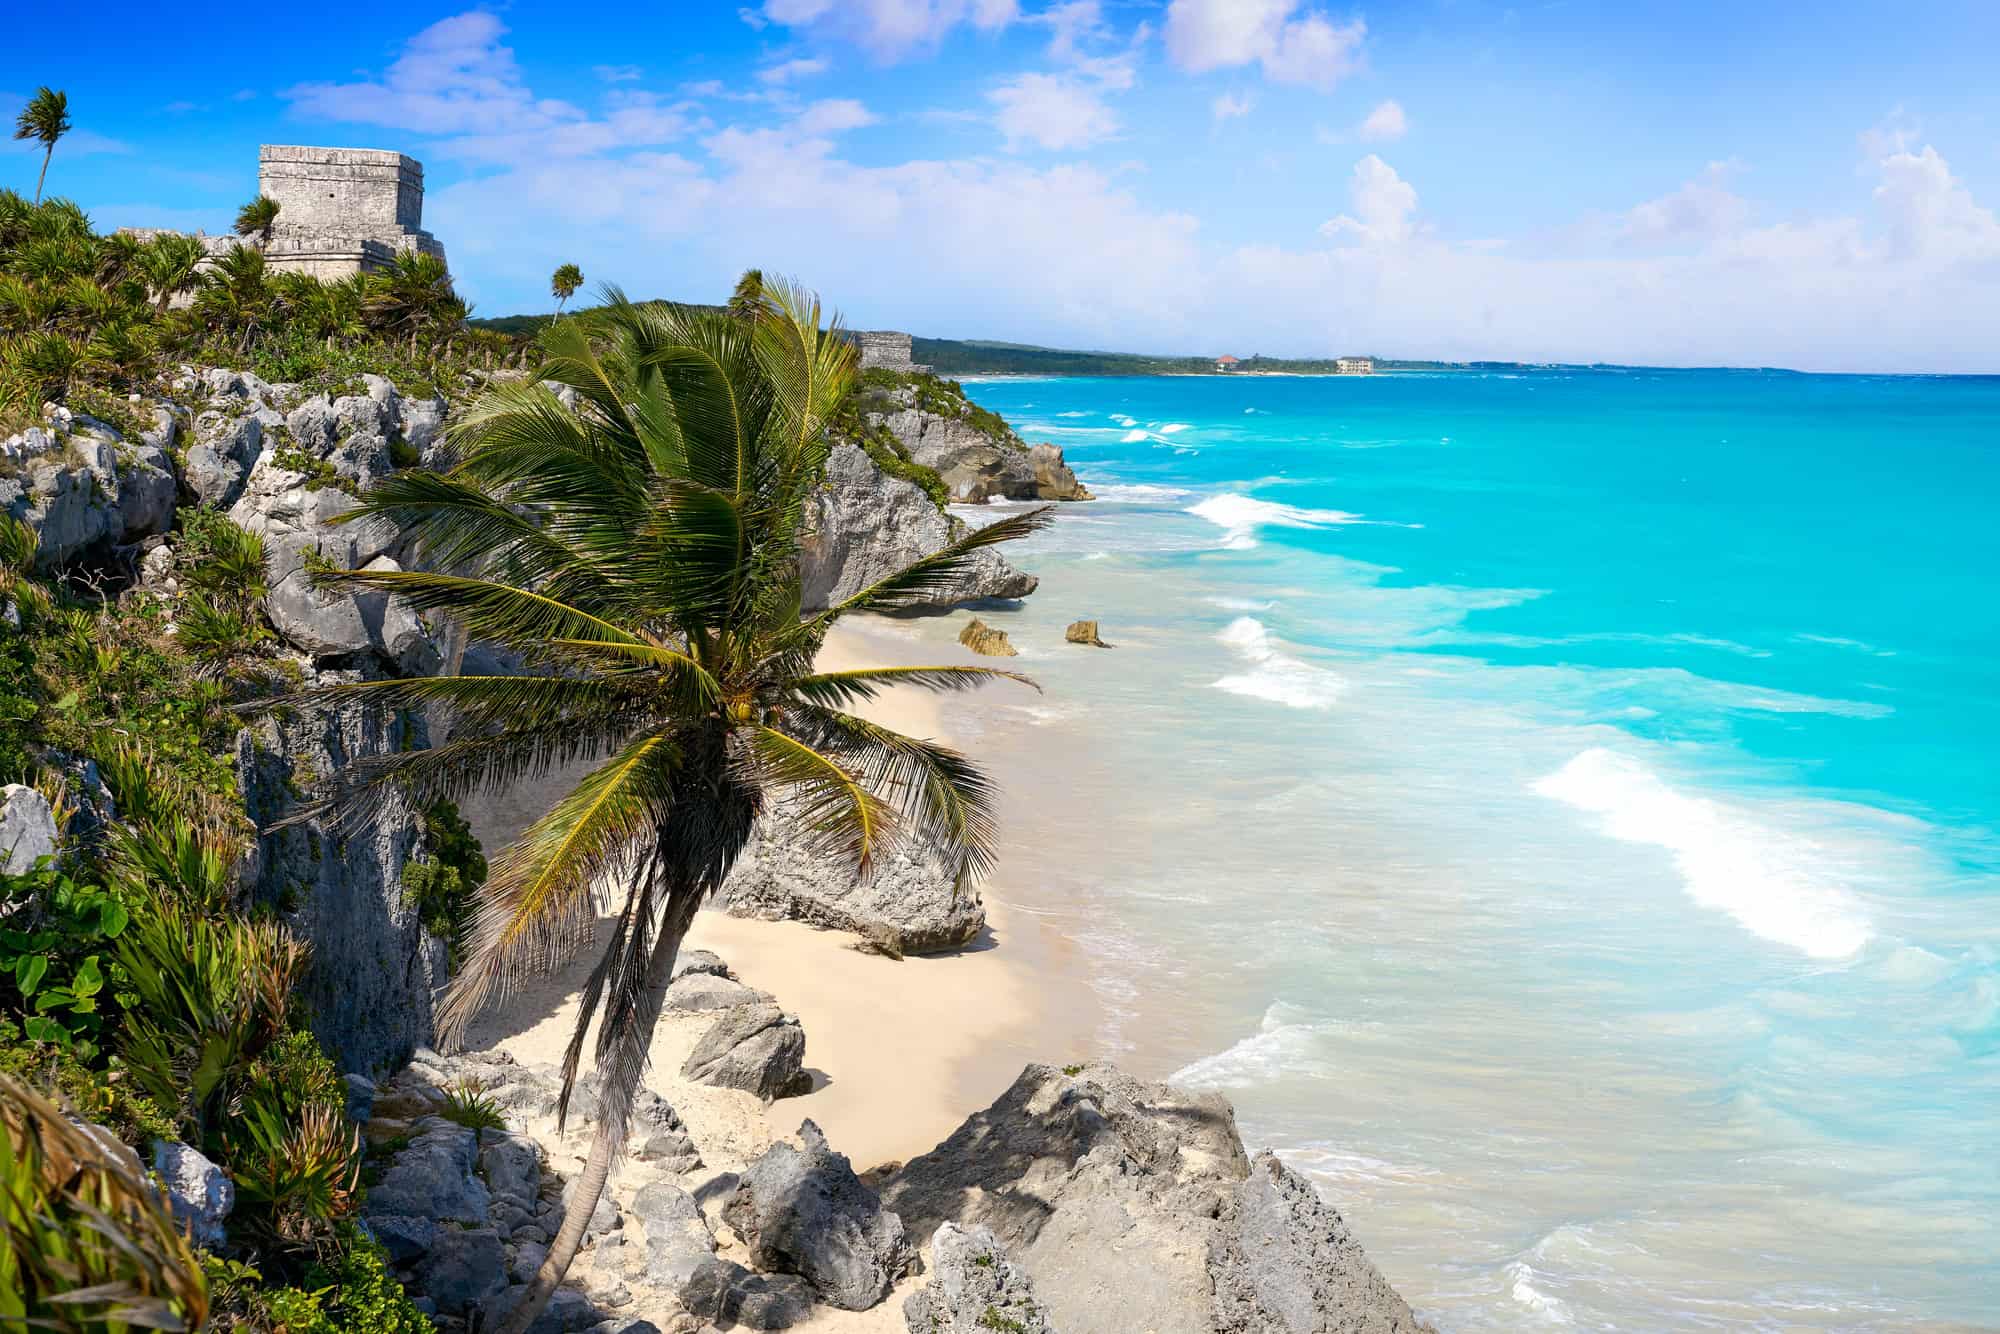 <p>Tulum Beach, nestled on the Yucatán Peninsula of Mexico, offers more than just its pristine sands and crystal-clear waters. This unique destination is steeped in history, with the ancient Mayan ruins of El Castillo perched dramatically atop a 39-foot cliff overlooking the Caribbean Sea. </p> <p>Here, history enthusiasts and beach lovers alike can explore the remains of a 13th-century Mayan port city, then relax on the soft white sands or snorkel in the vibrant coral reefs teeming with marine life. Whether you’re drawn by the historical allure or the natural beauty, Tulum Beach is a compelling addition to any summer bucket list.</p>